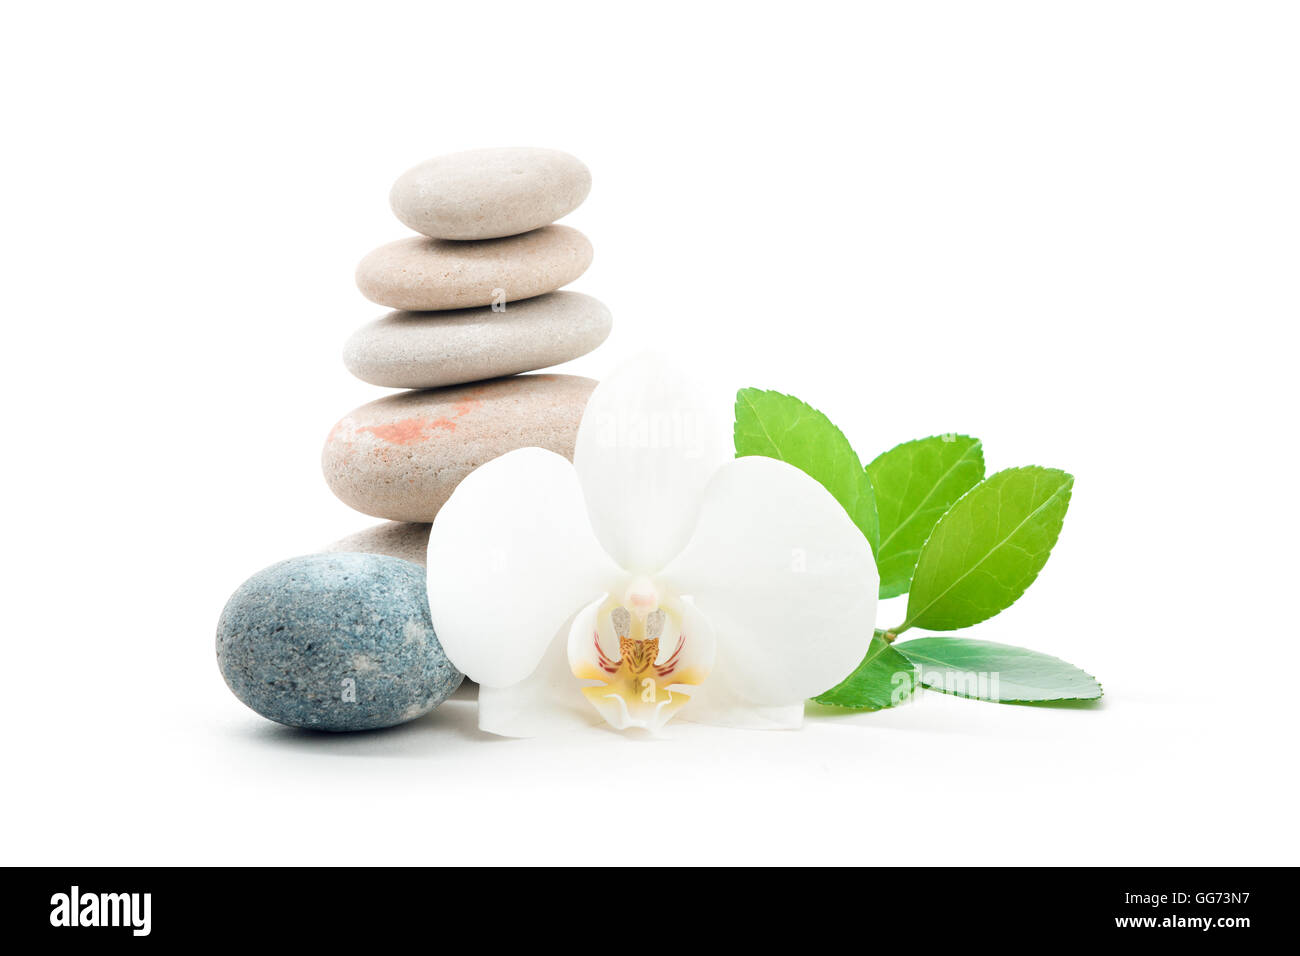 Pile of balancing pebble stones and green leaf, like ZEN stone, isolated on white background, spa welness tranquil scene concept Stock Photo